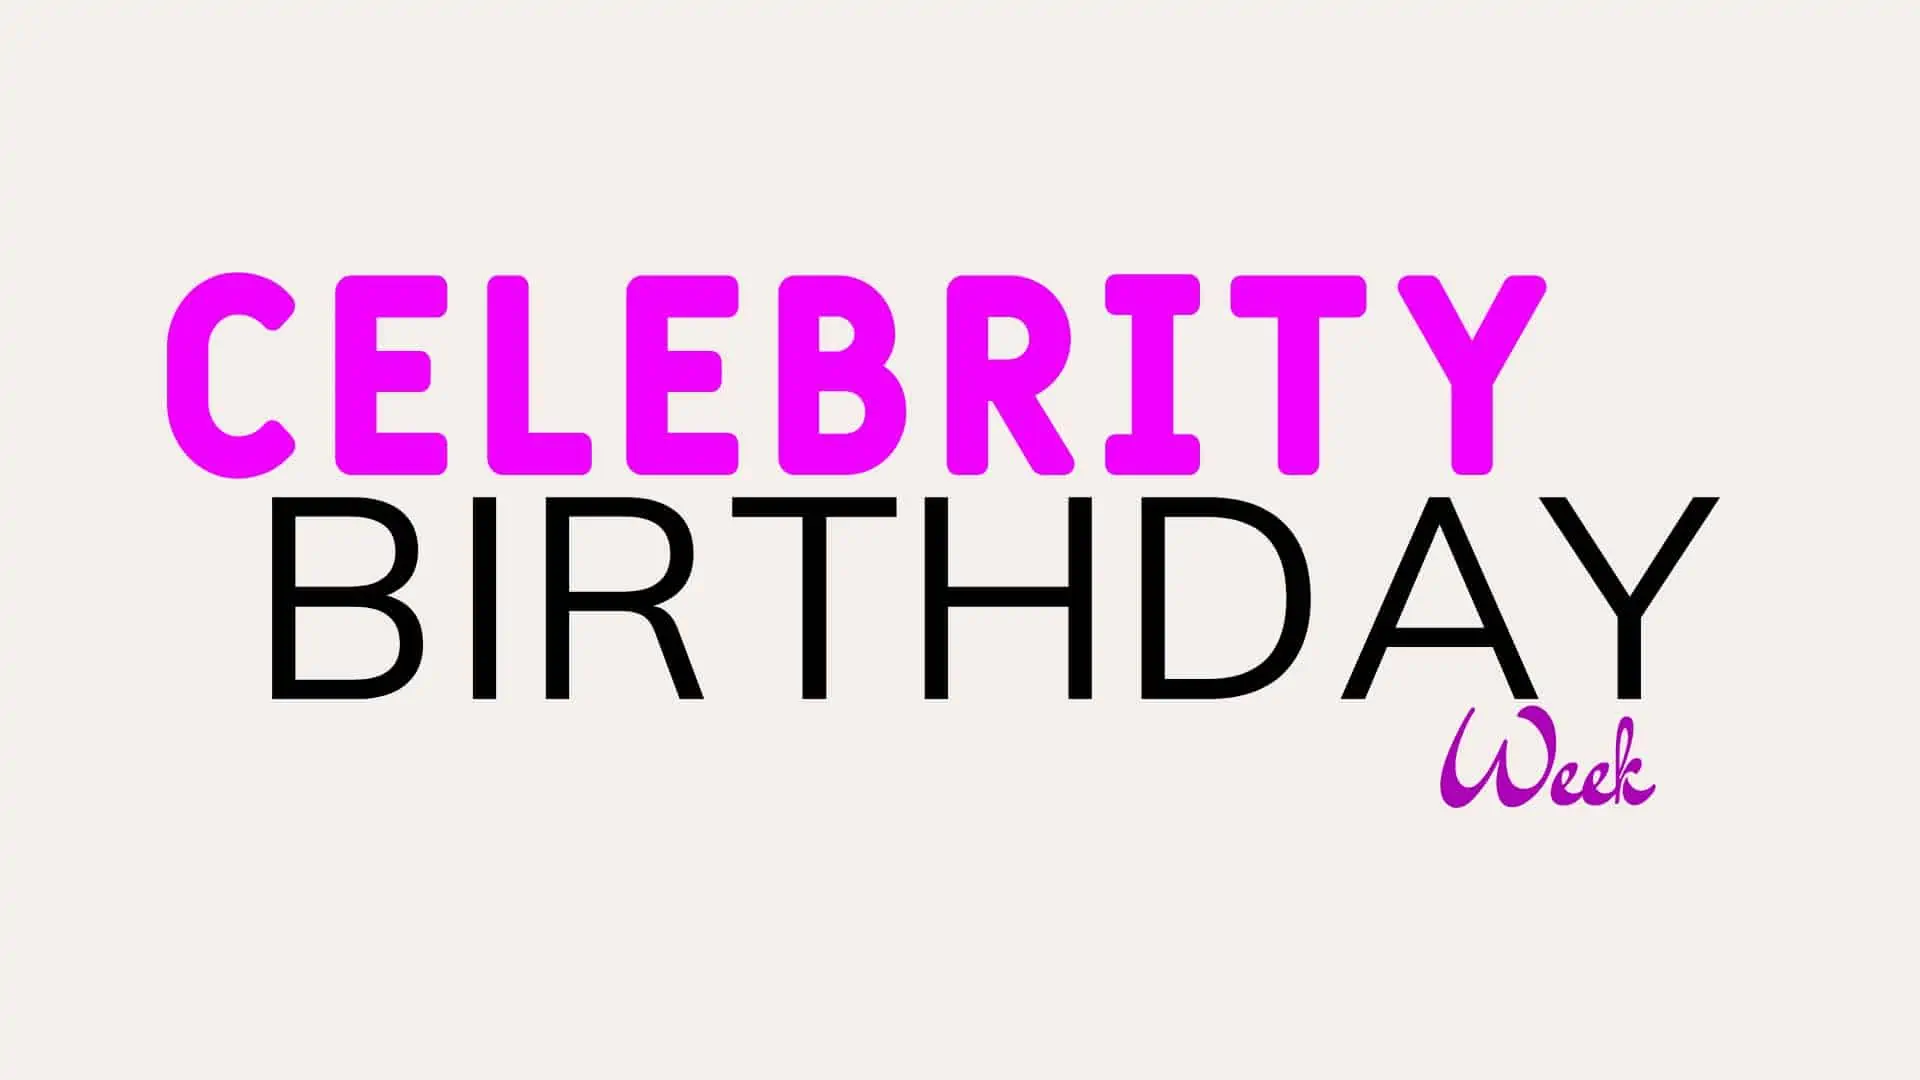 Celebrity birthdays for the week of May 1-7